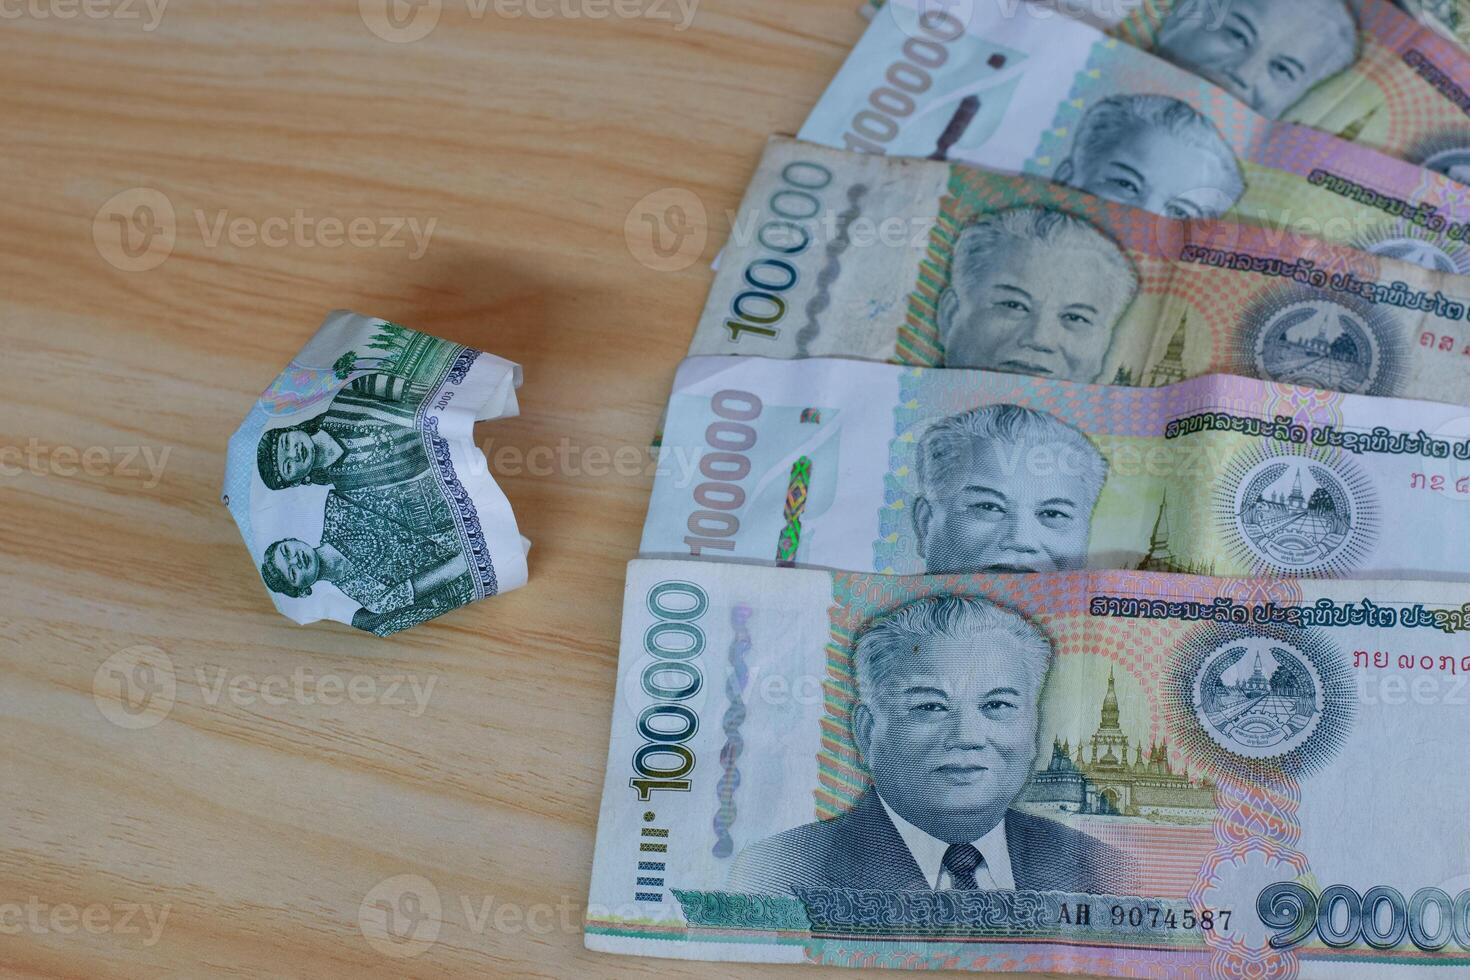 The exchange rate today is 100 baht equal to sixty thousand Lao kips and continues to inflate On August 3, the Lao Kip continued to depreciate photo